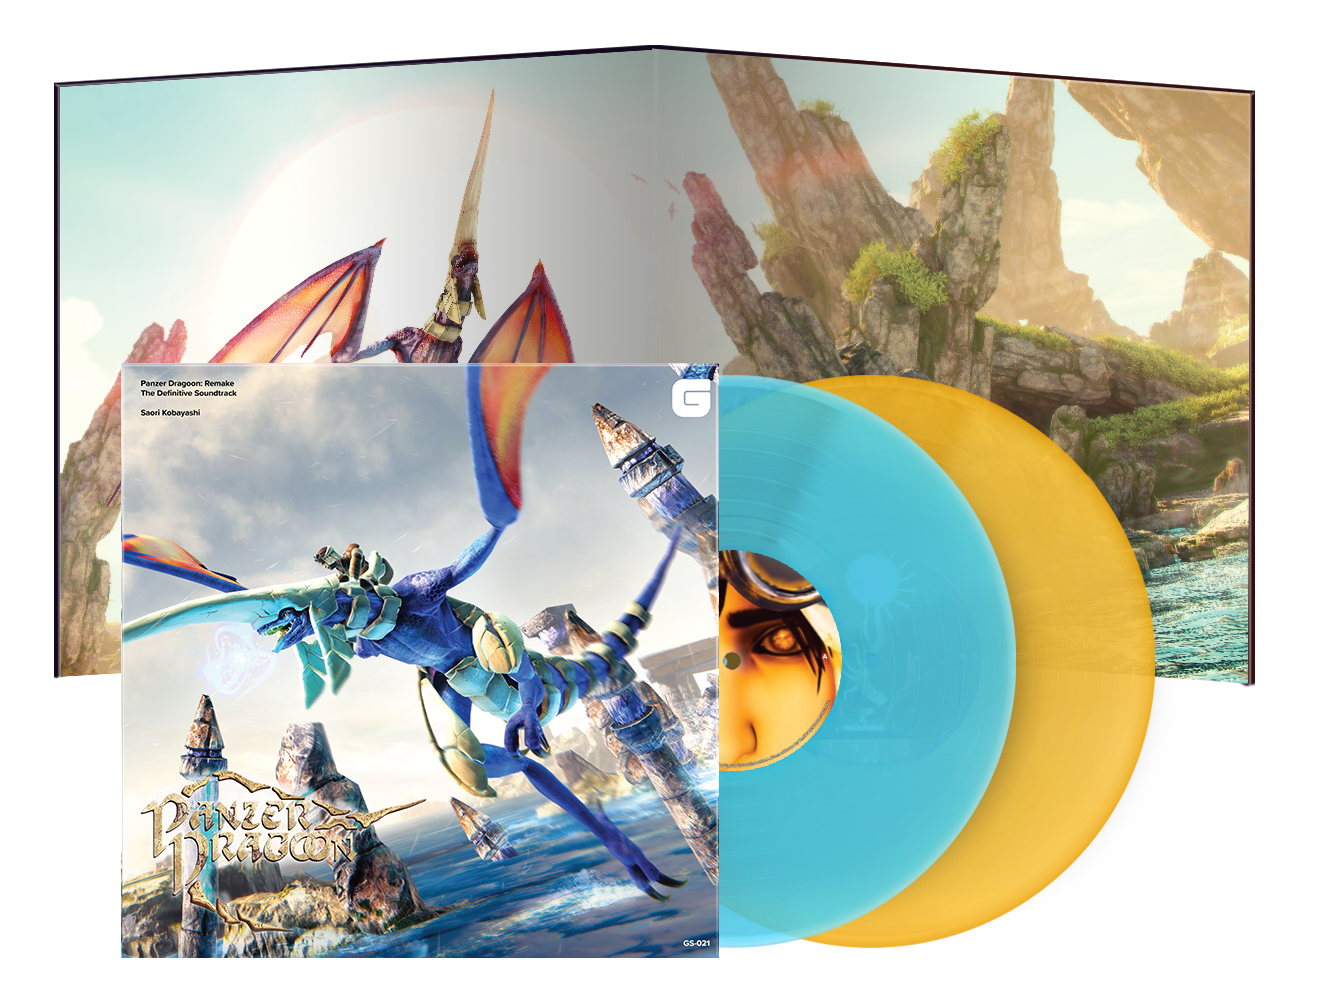 Panzer Dragoon: Remake - The Definitive Soundtrack - Limited